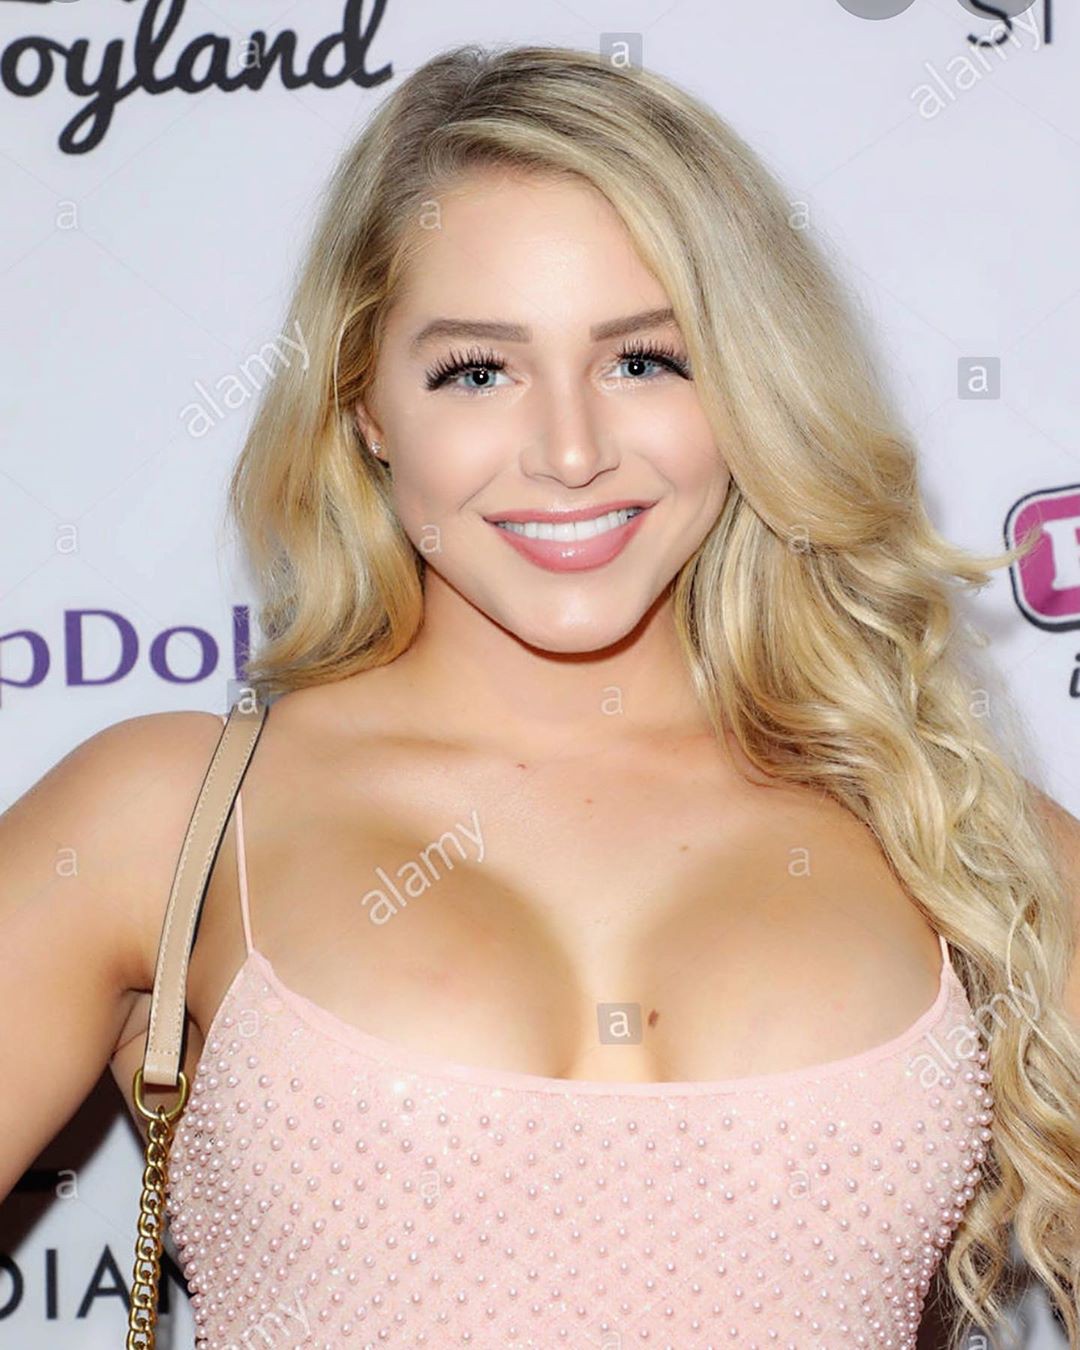 Miss Courtney Tailor photo 18